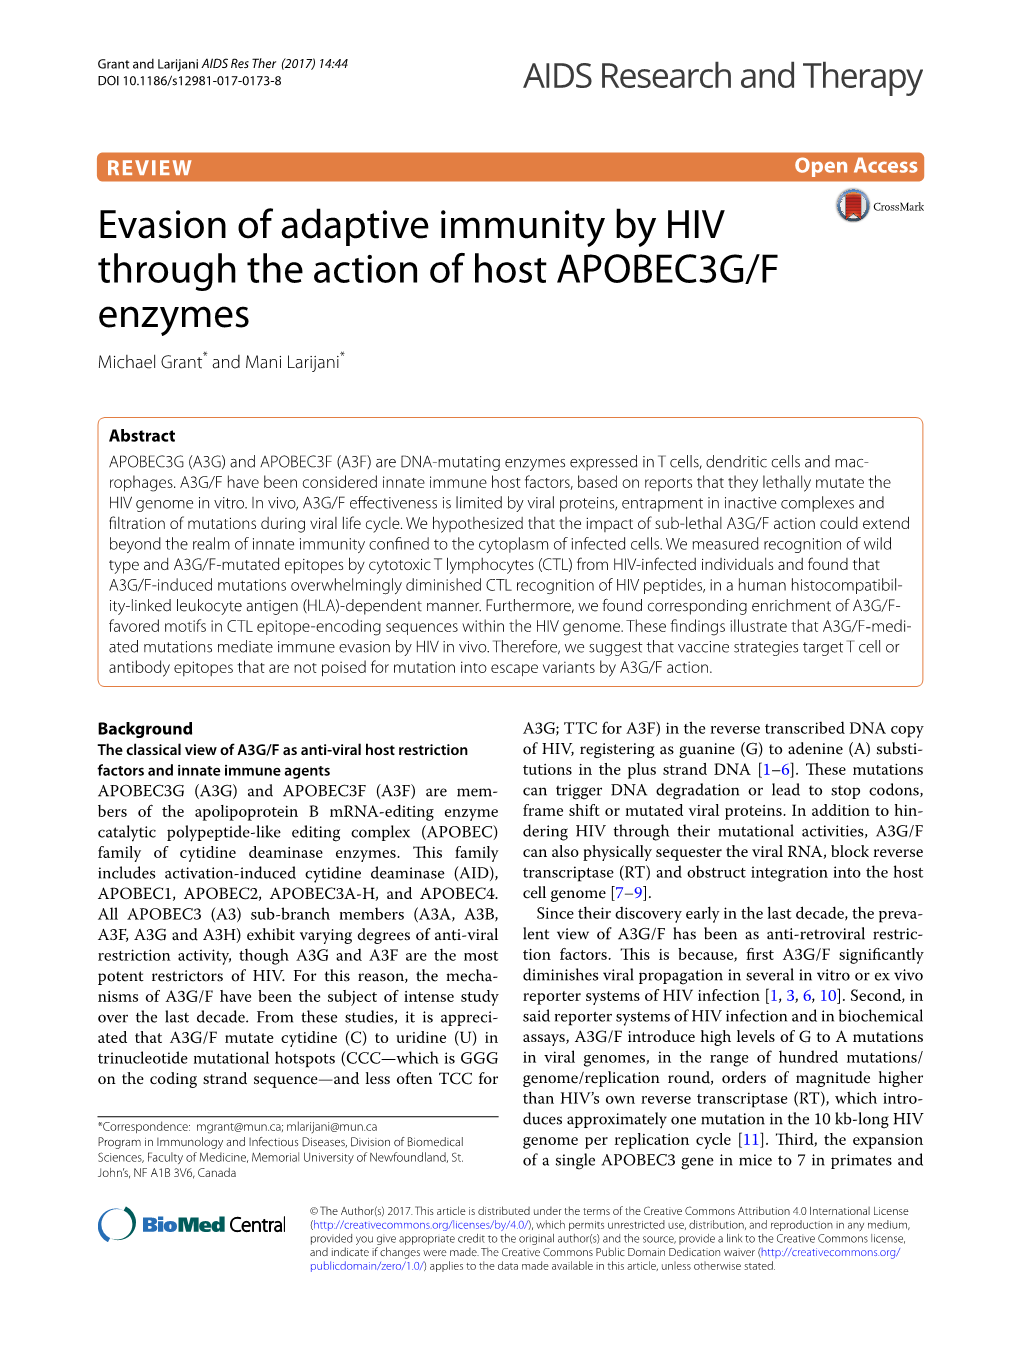 Evasion of Adaptive Immunity by HIV Through the Action of Host APOBEC3G/F Enzymes Michael Grant* and Mani Larijani*